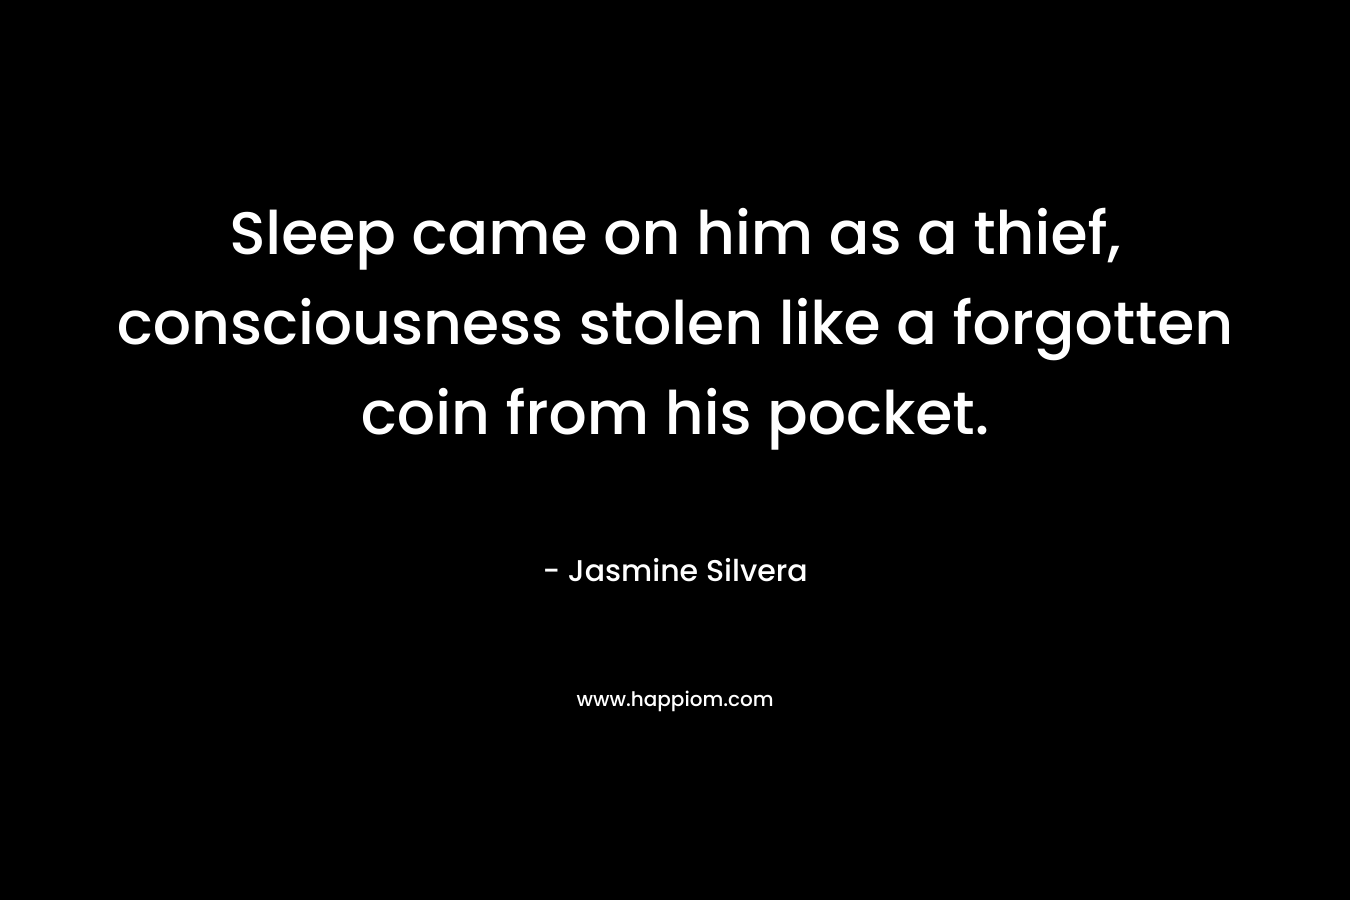 Sleep came on him as a thief, consciousness stolen like a forgotten coin from his pocket. – Jasmine Silvera